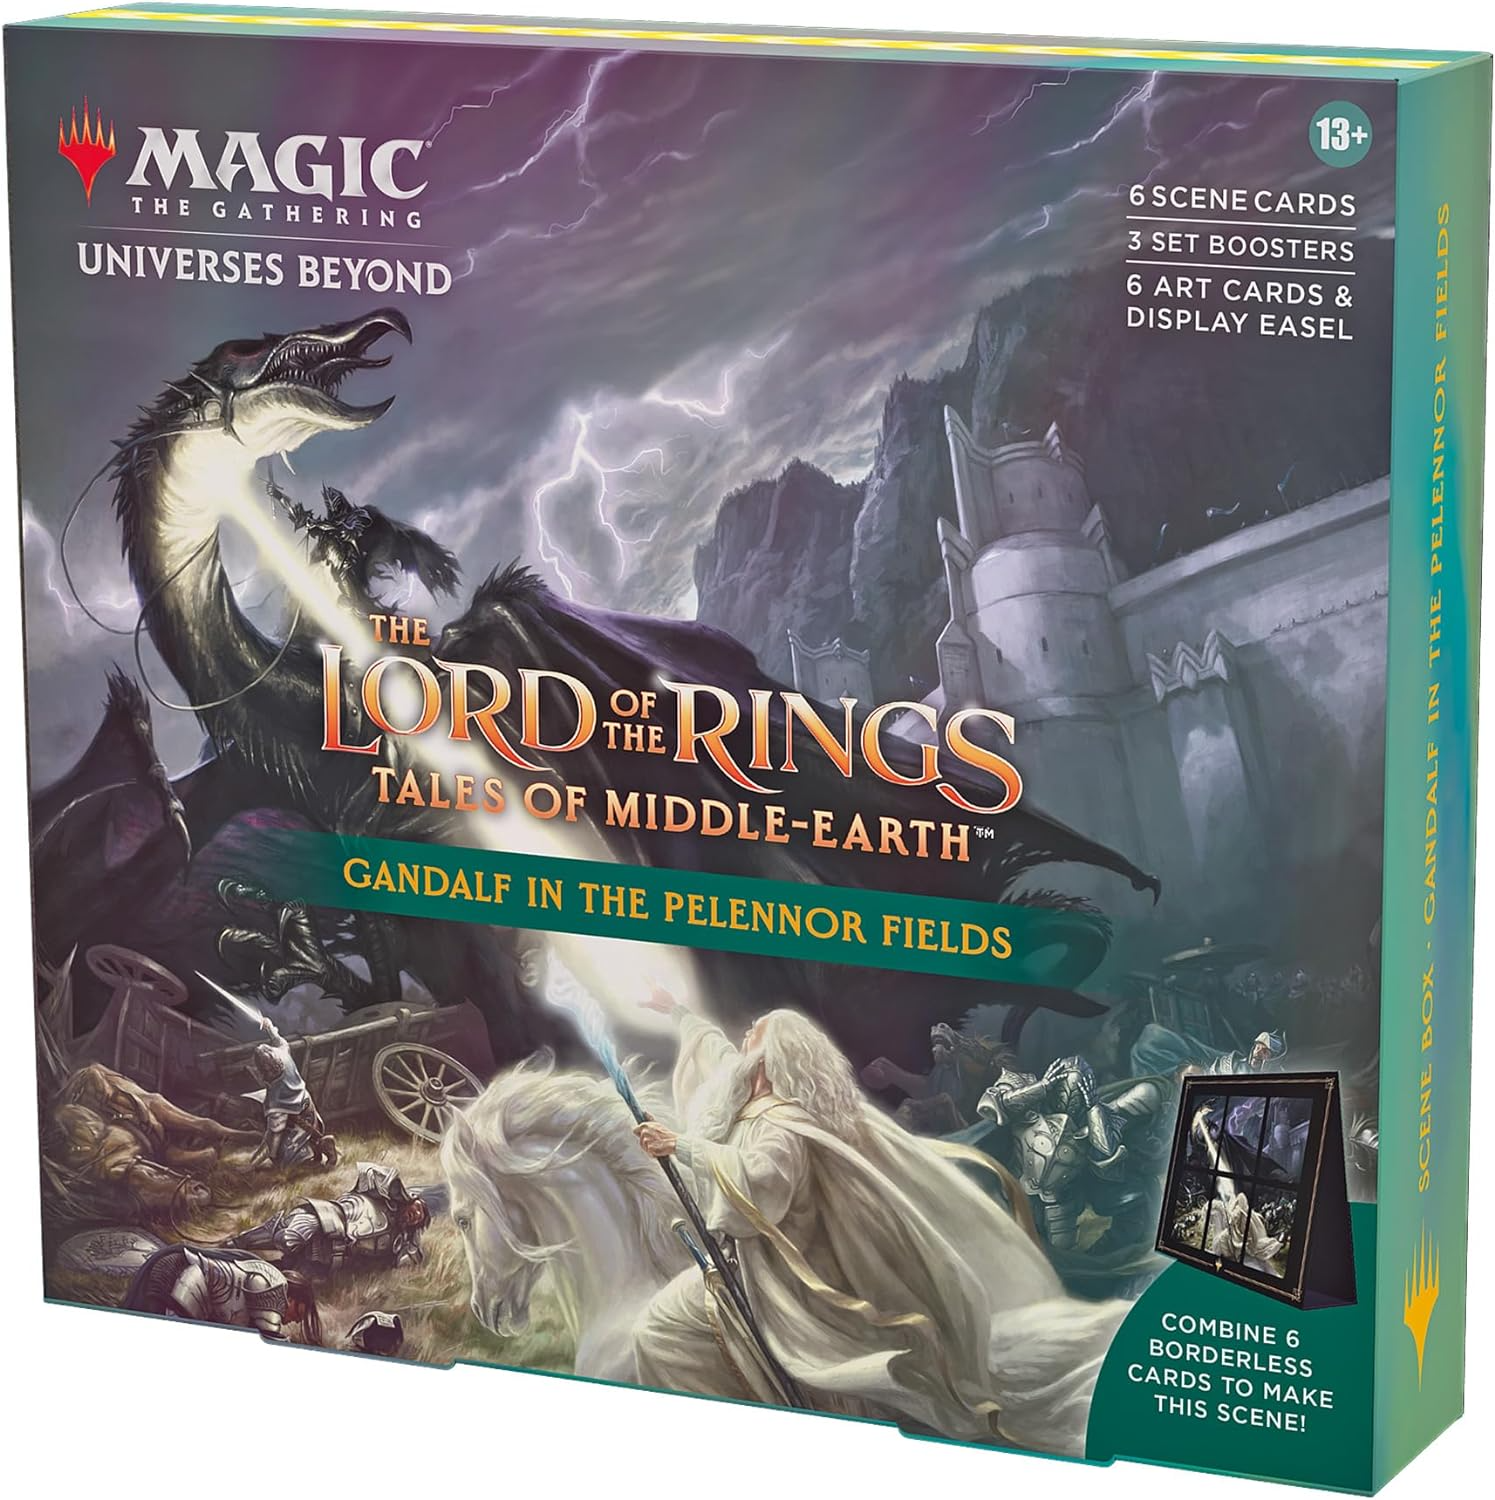 The Lord of the Rings: Tales of Middle-Earth Scene Box (Gandalf in the Pelennor Fields) | Yard's Games Ltd